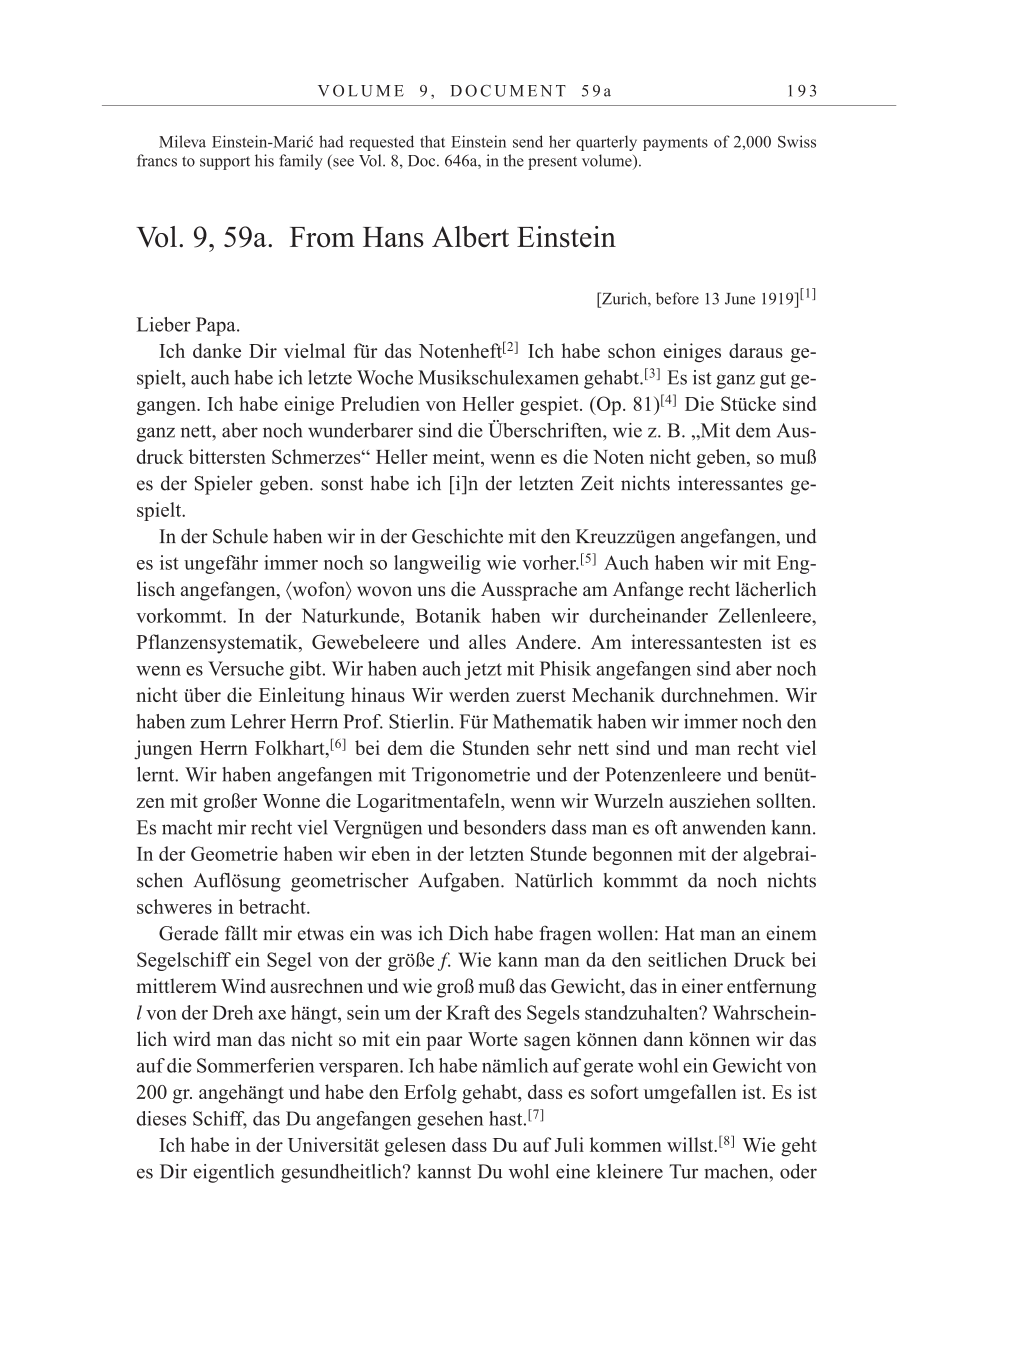 Volume 10: The Berlin Years: Correspondence May-December 1920 / Supplementary Correspondence 1909-1920 page 193